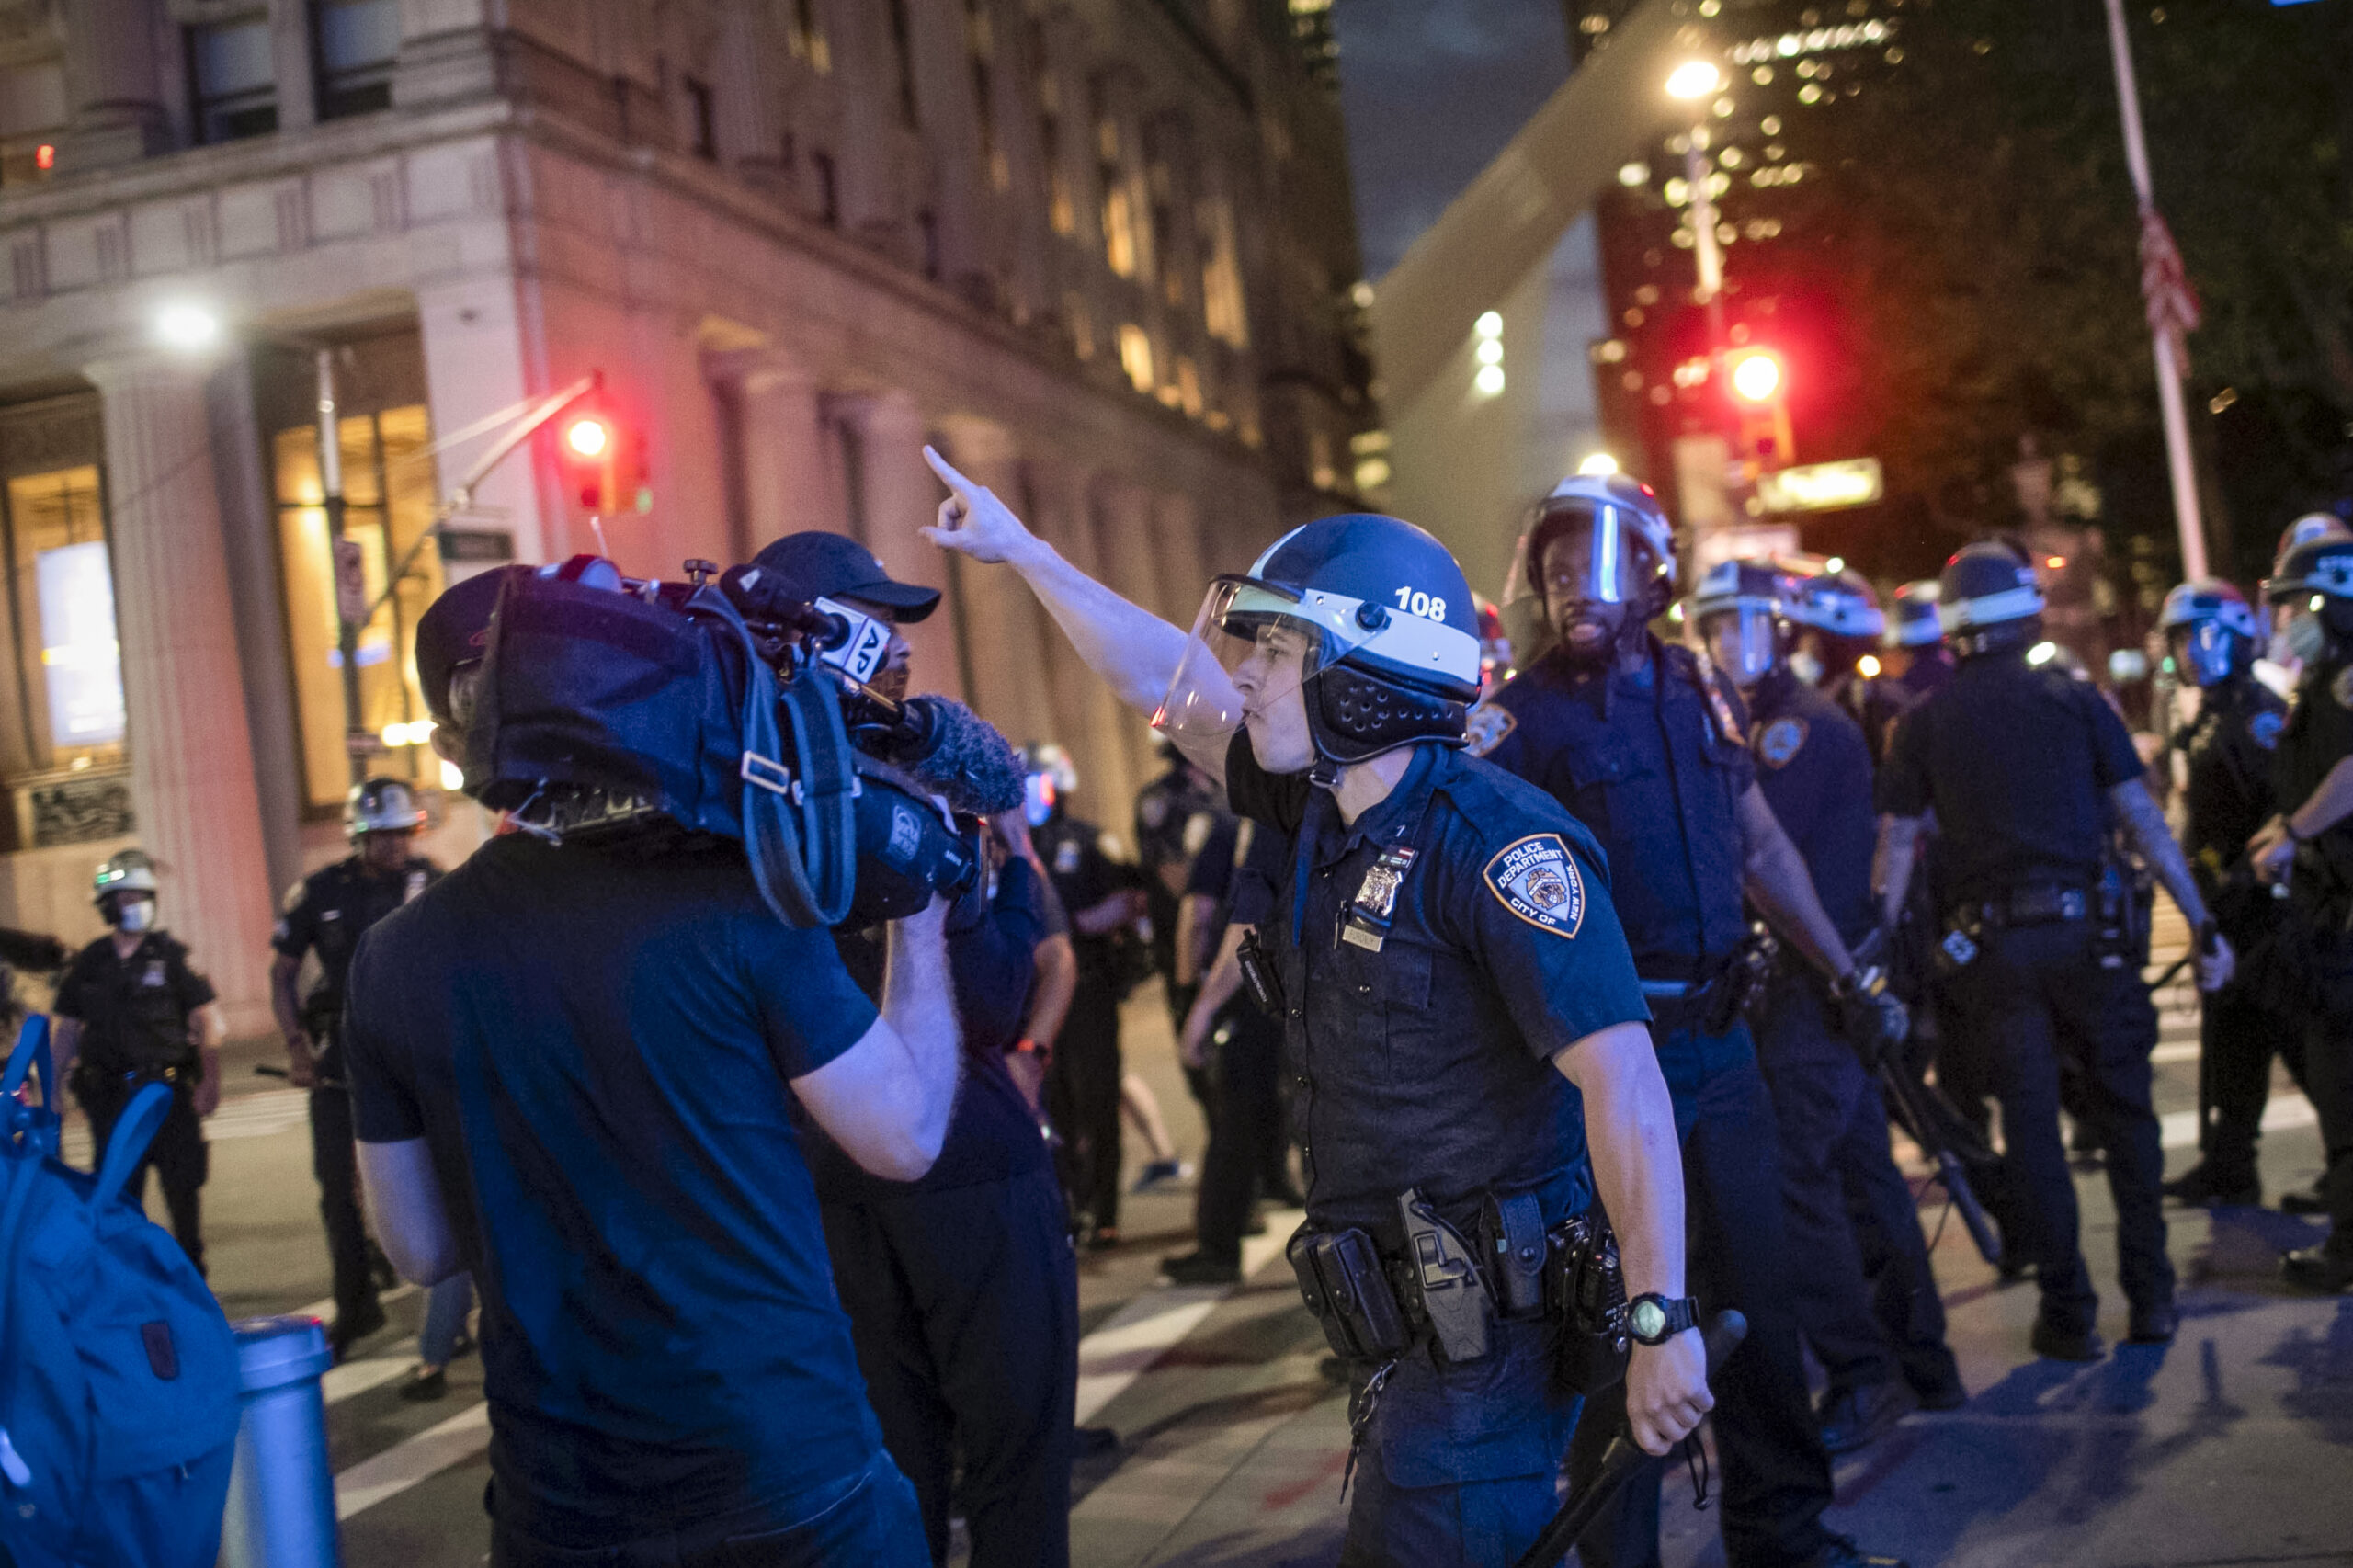 Photo of NYPD officer confronting AP photographer during protests in New York City